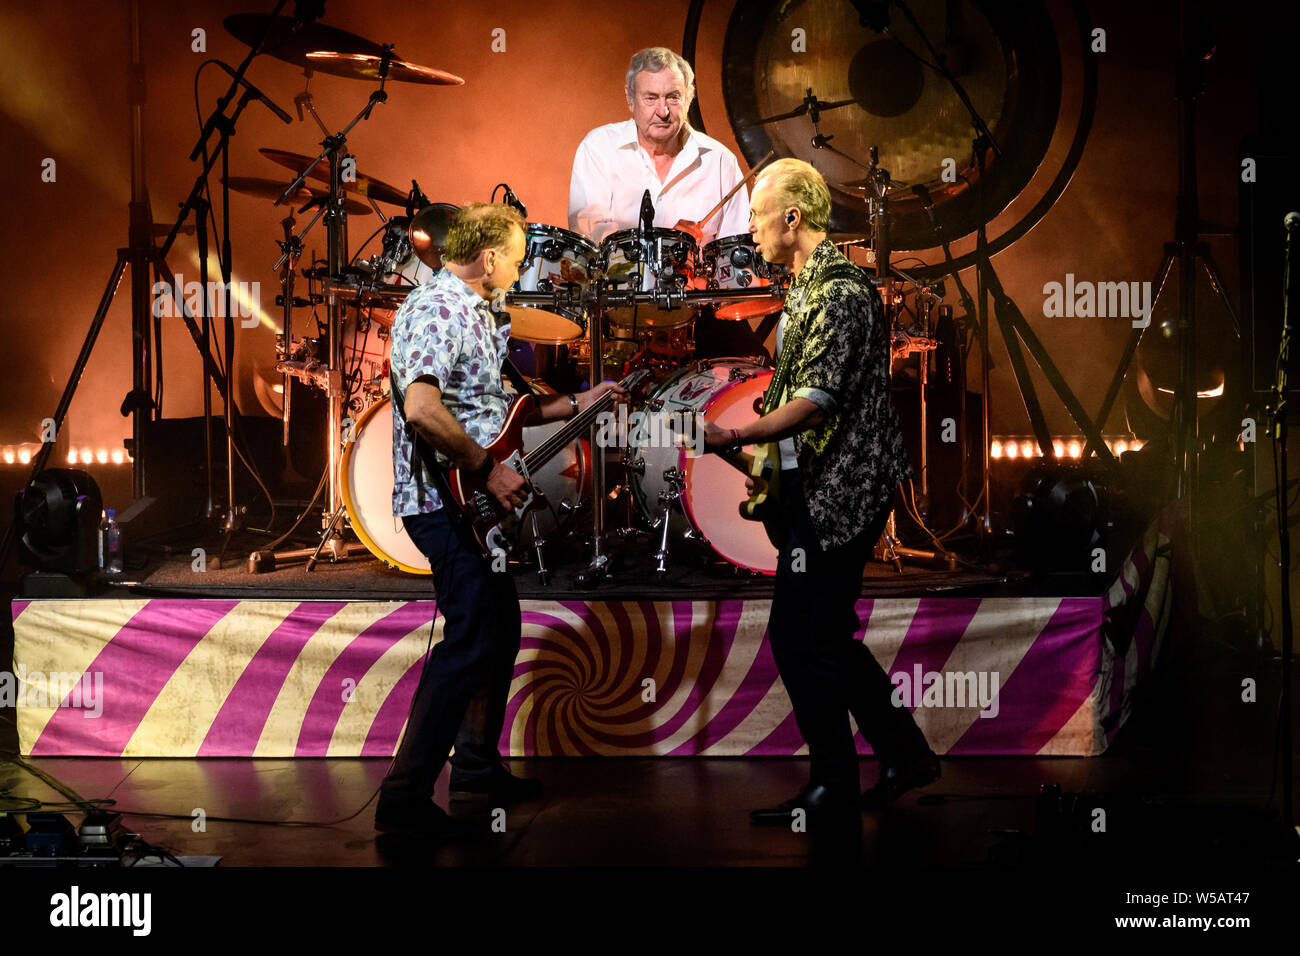 Guy Pratt, Nick Mason former drummer with 'Pink Floyd' and Gary Kemp former guitarist with 'Spandau Ballet' perform with Nick Mason’s Saucerful of Secrets Psychedelic Rock band a sold out show in Toronto. Stock Photo